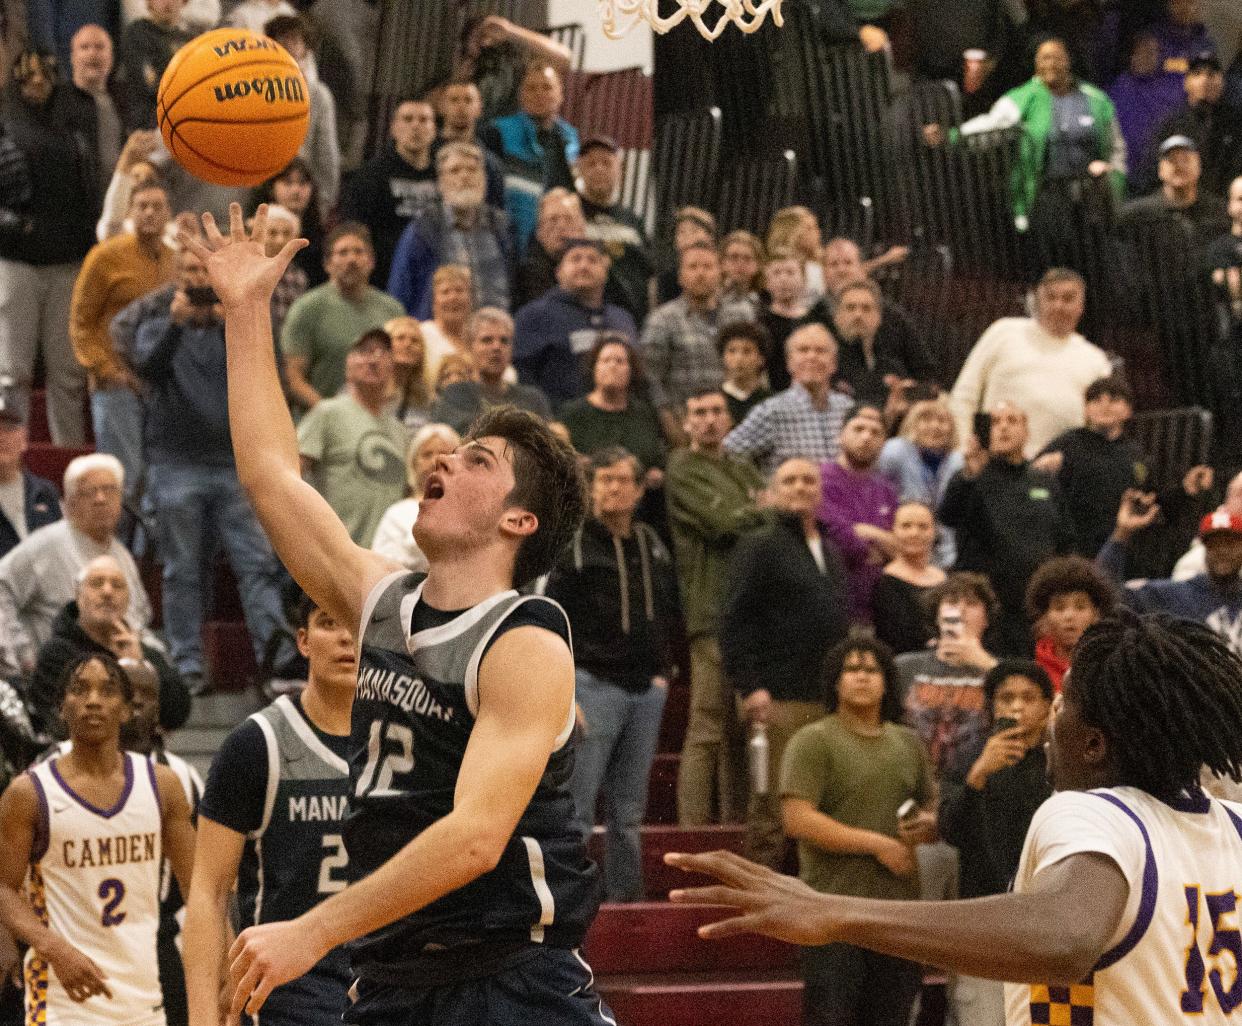 Manasquan's Griffin Linstra puts up what appeared to be the game-winning shot against Camden in the NJSIAA Group 2 Semifinals, but it was later ruled the shot came after the clock expired.